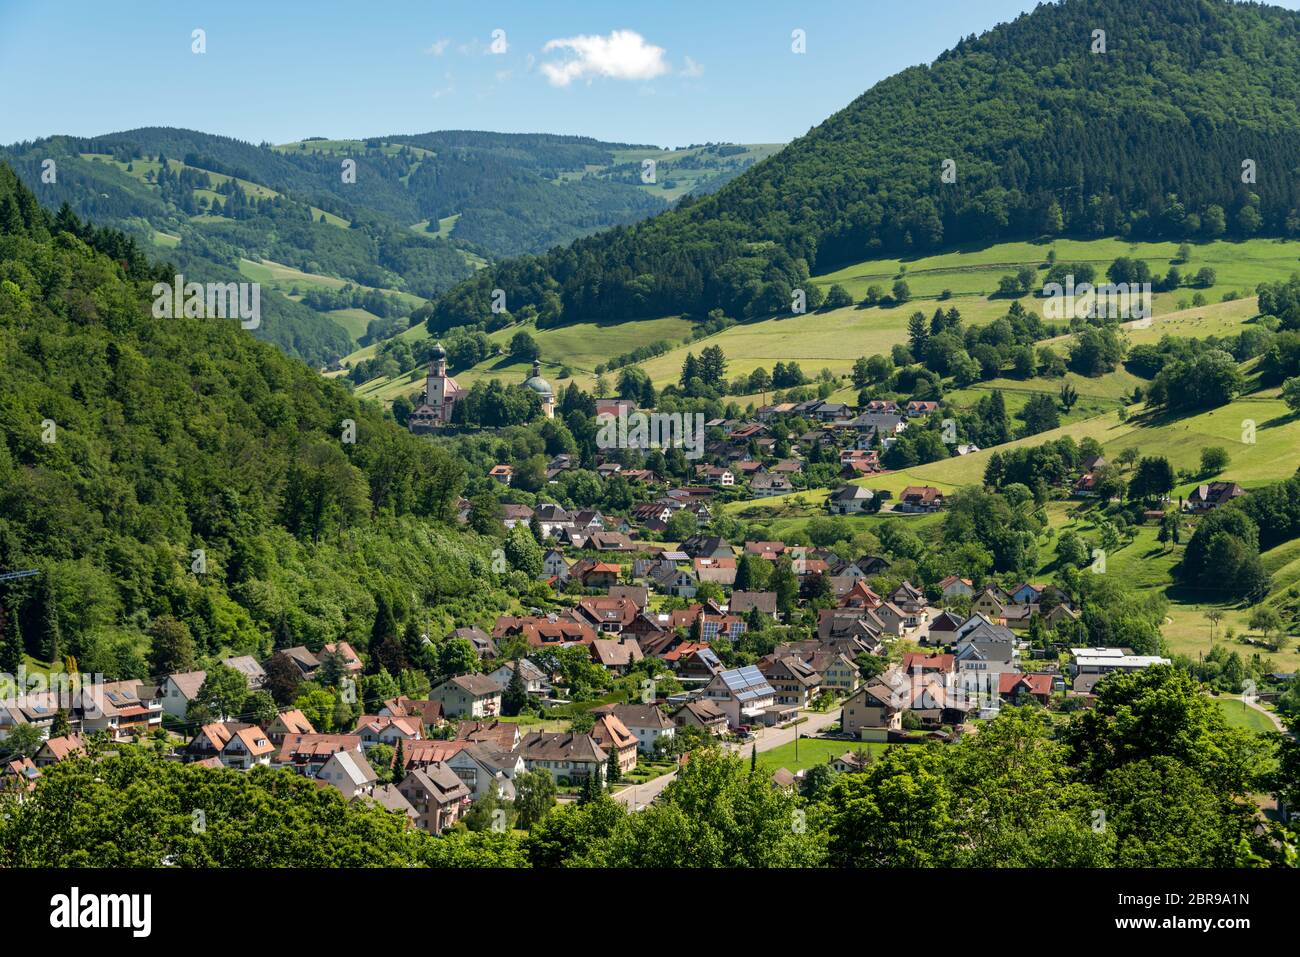 Wonderful landscape image of the small climatic resort village Muenstertal in the black forest with hills, meadows and mountain in the background Stock Photo